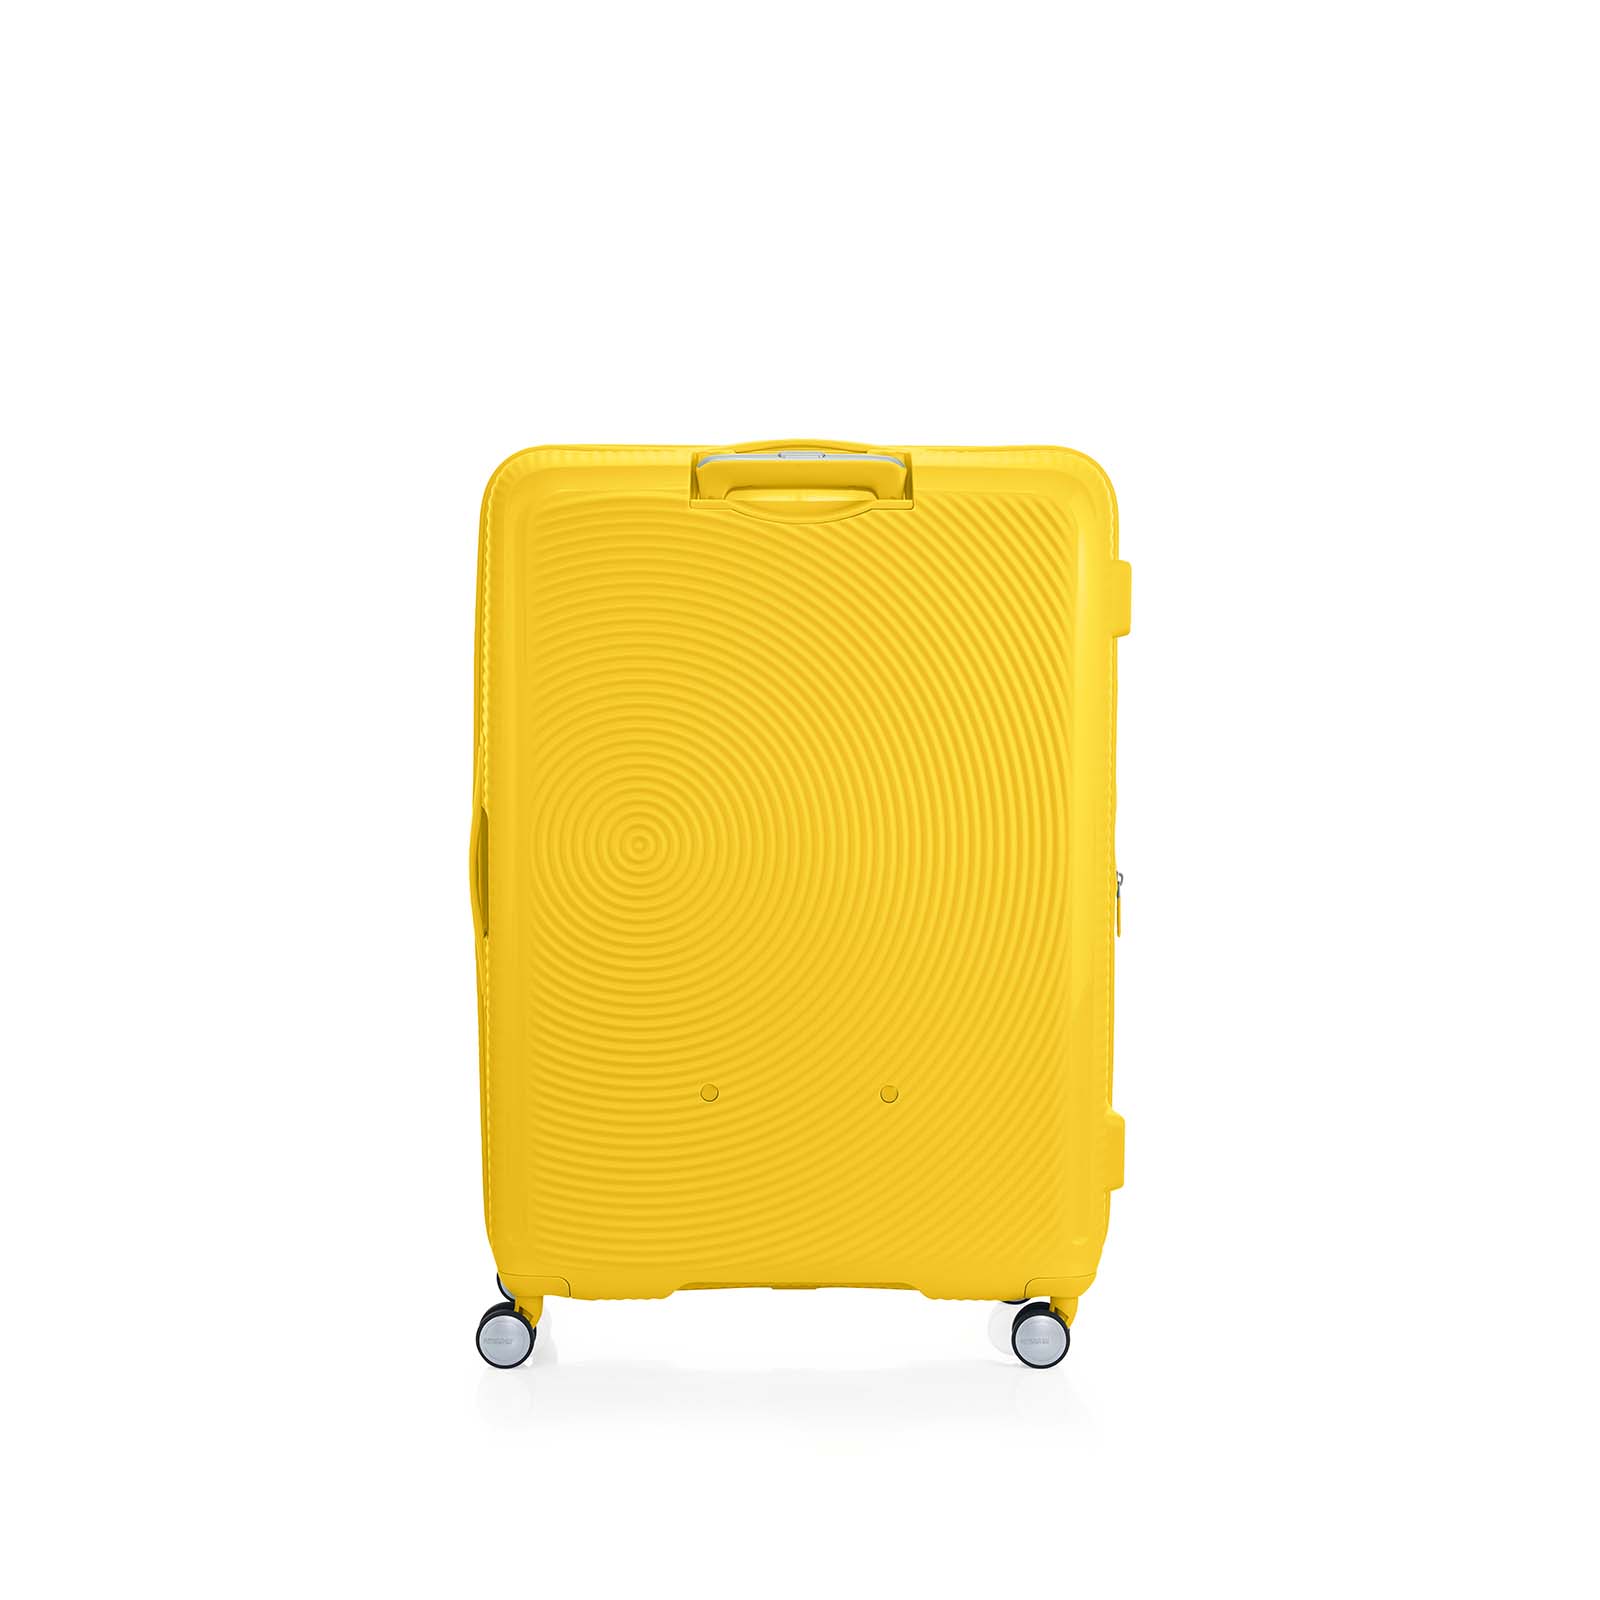 American-Tourister-Curio-2-80cm-Suitcase-Golden-Yellow-Back